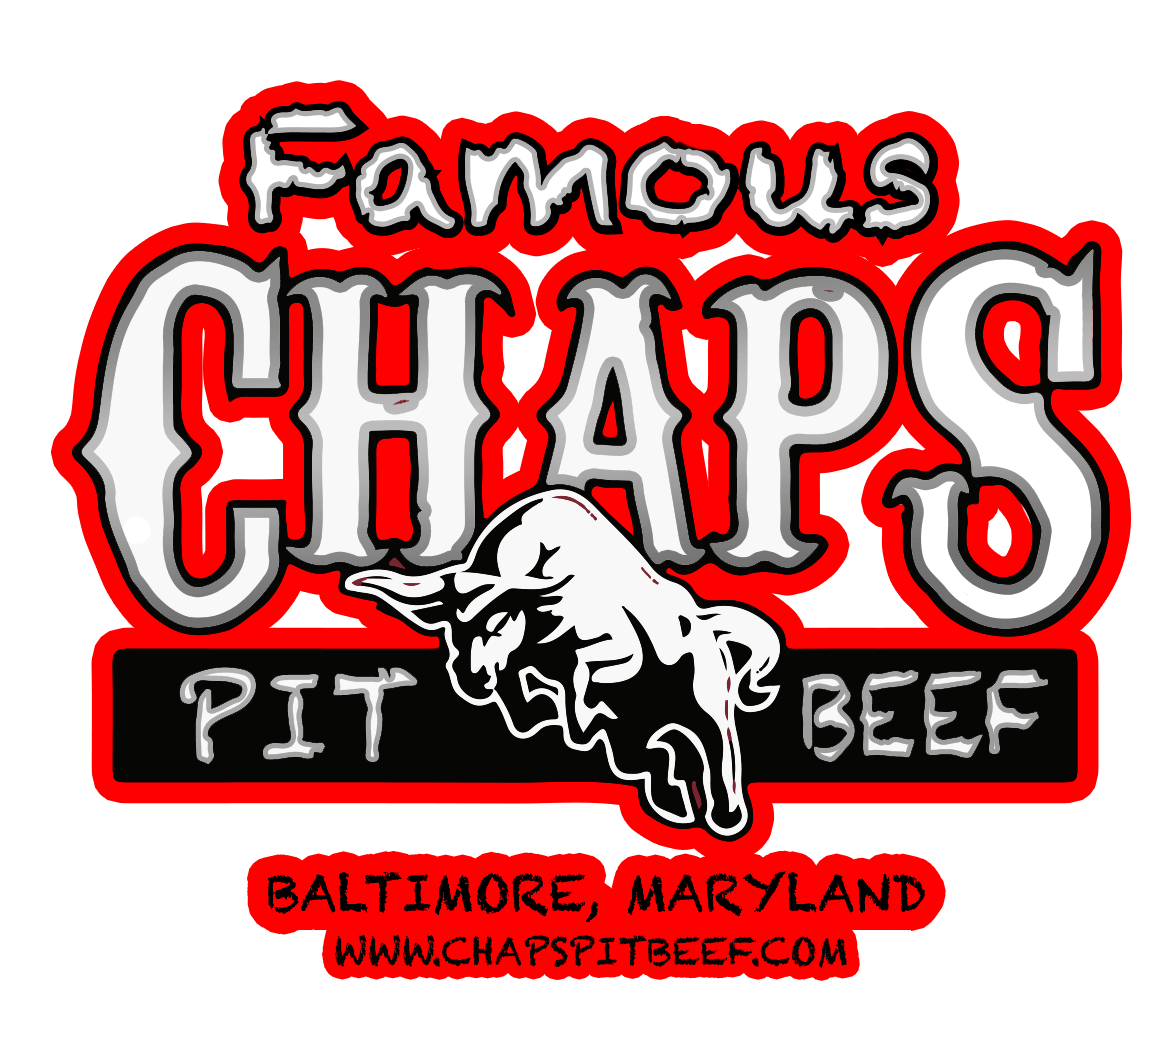 Chaps Logo - Chaps Pit Beef to Open Another Location - MBB Management